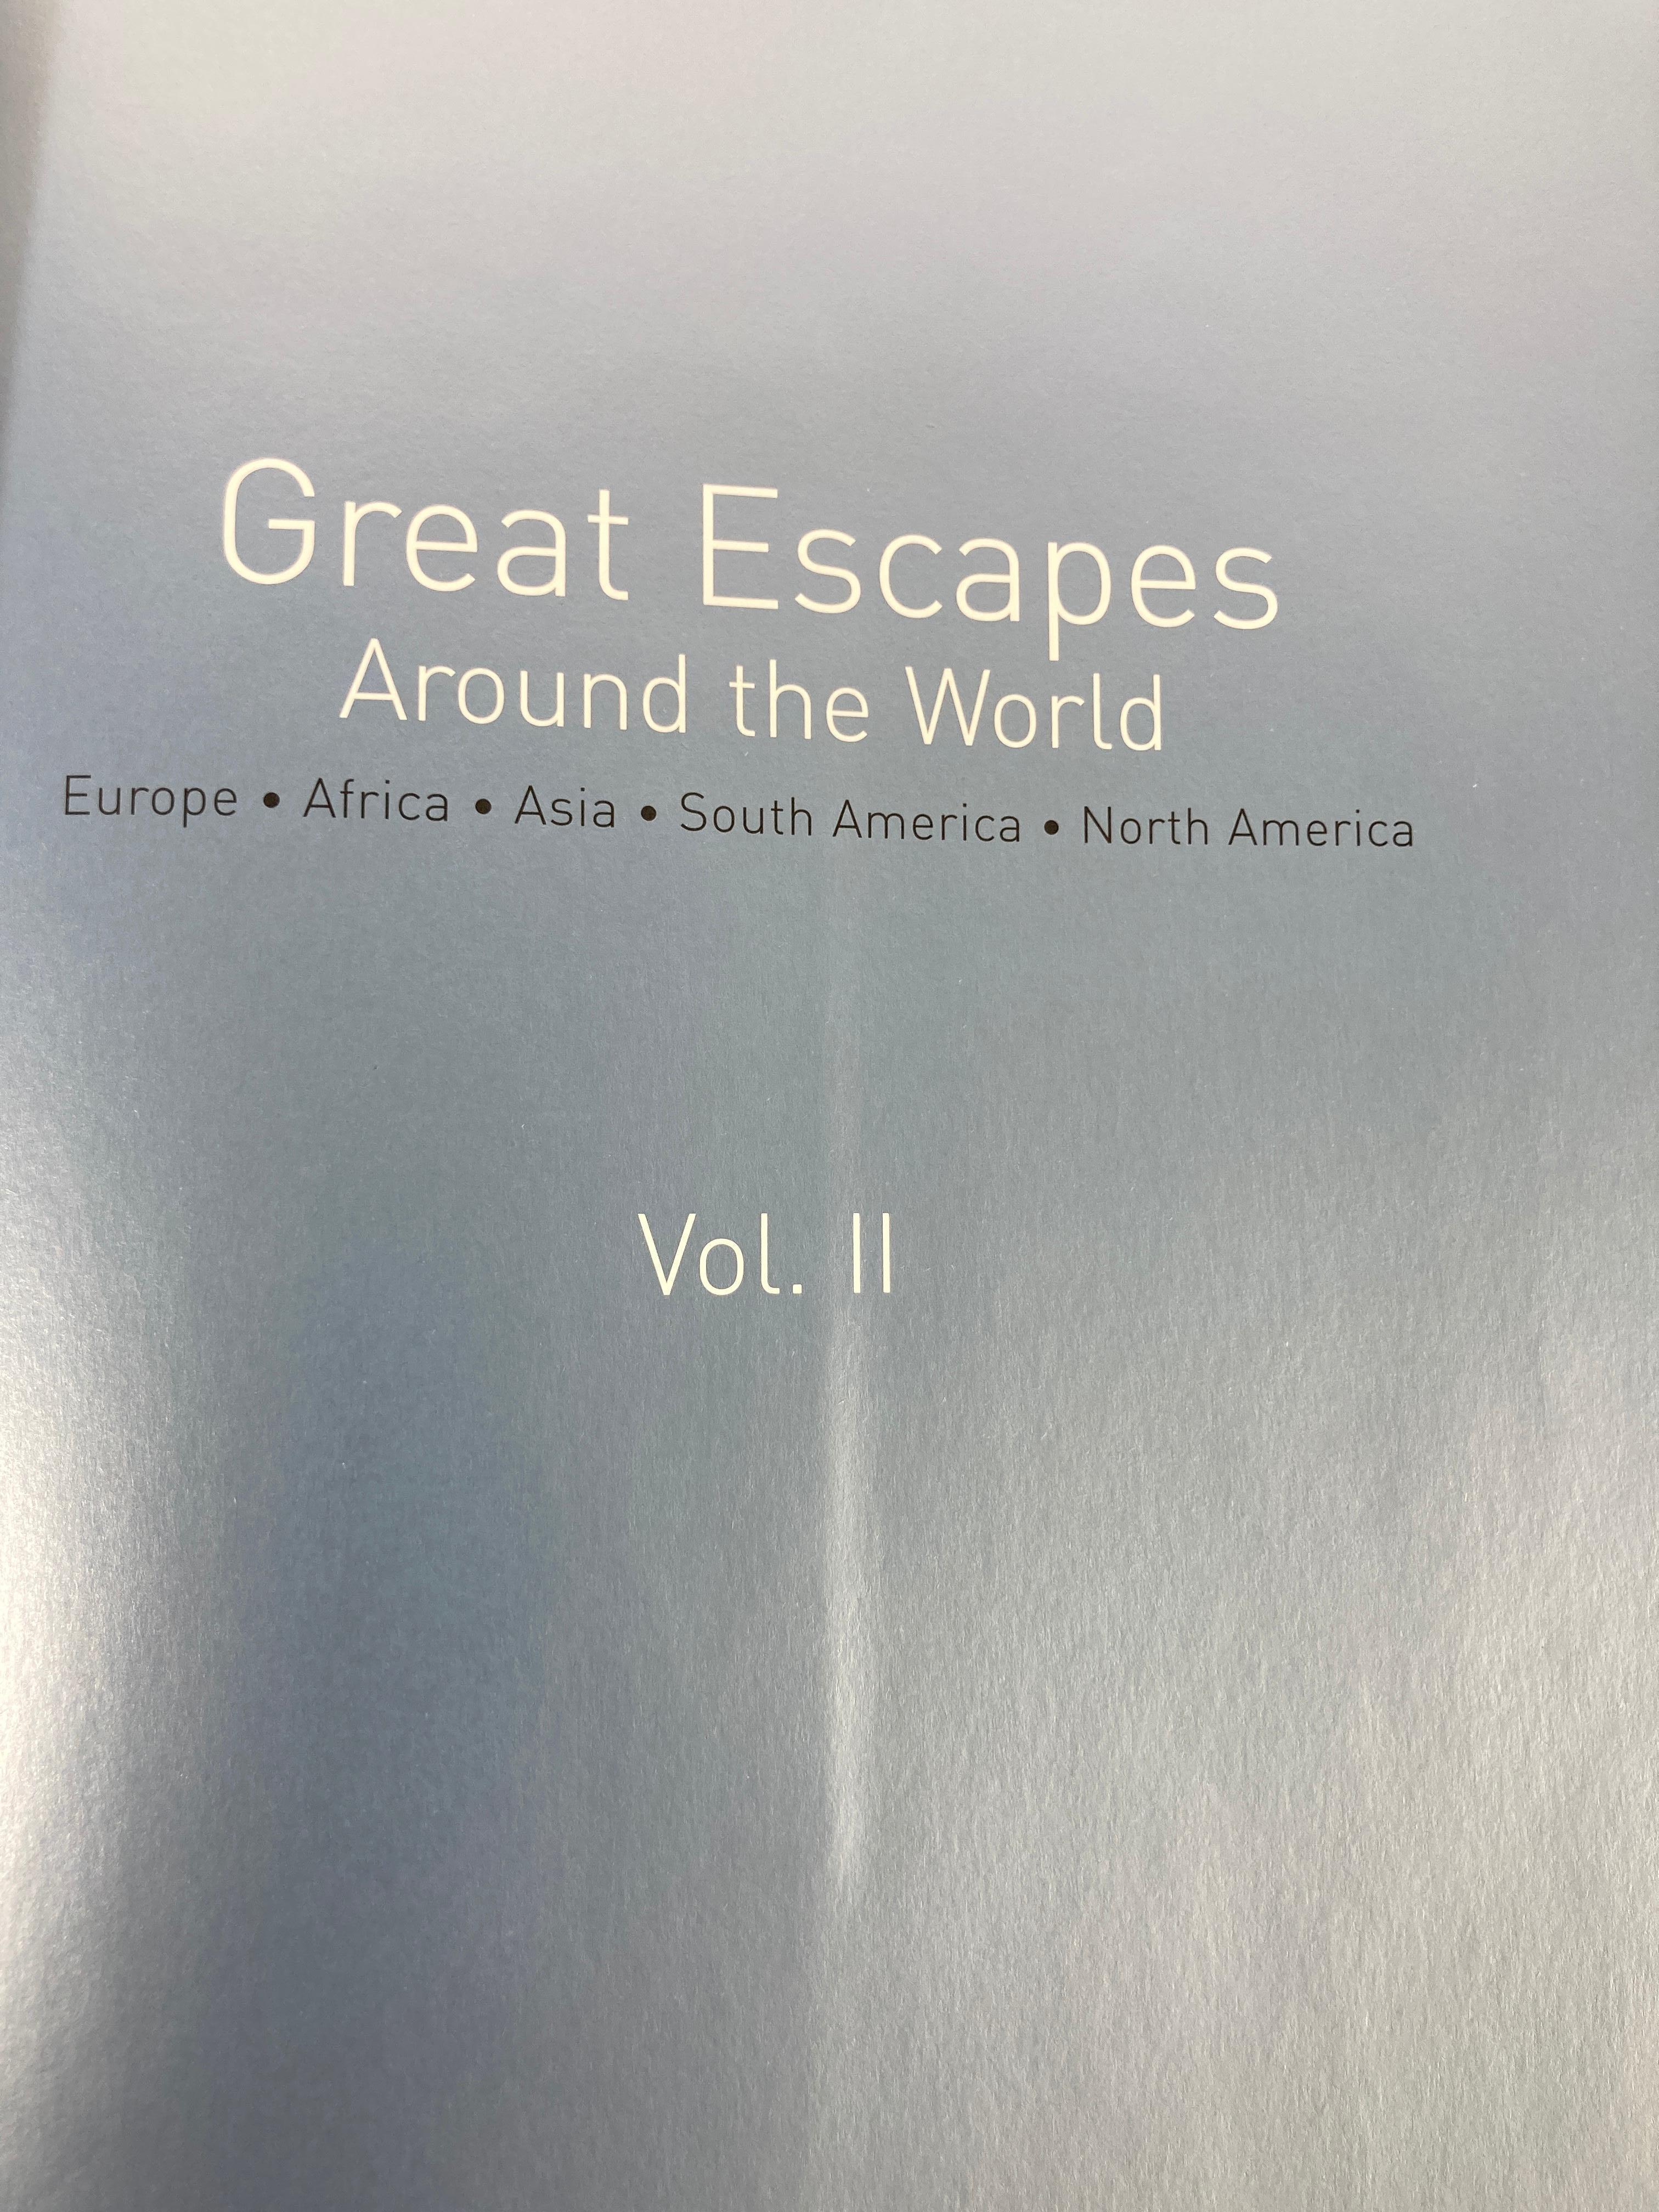 Great Escapes Around the World Vol. 2 by Taschen Hardcover Large Book 3